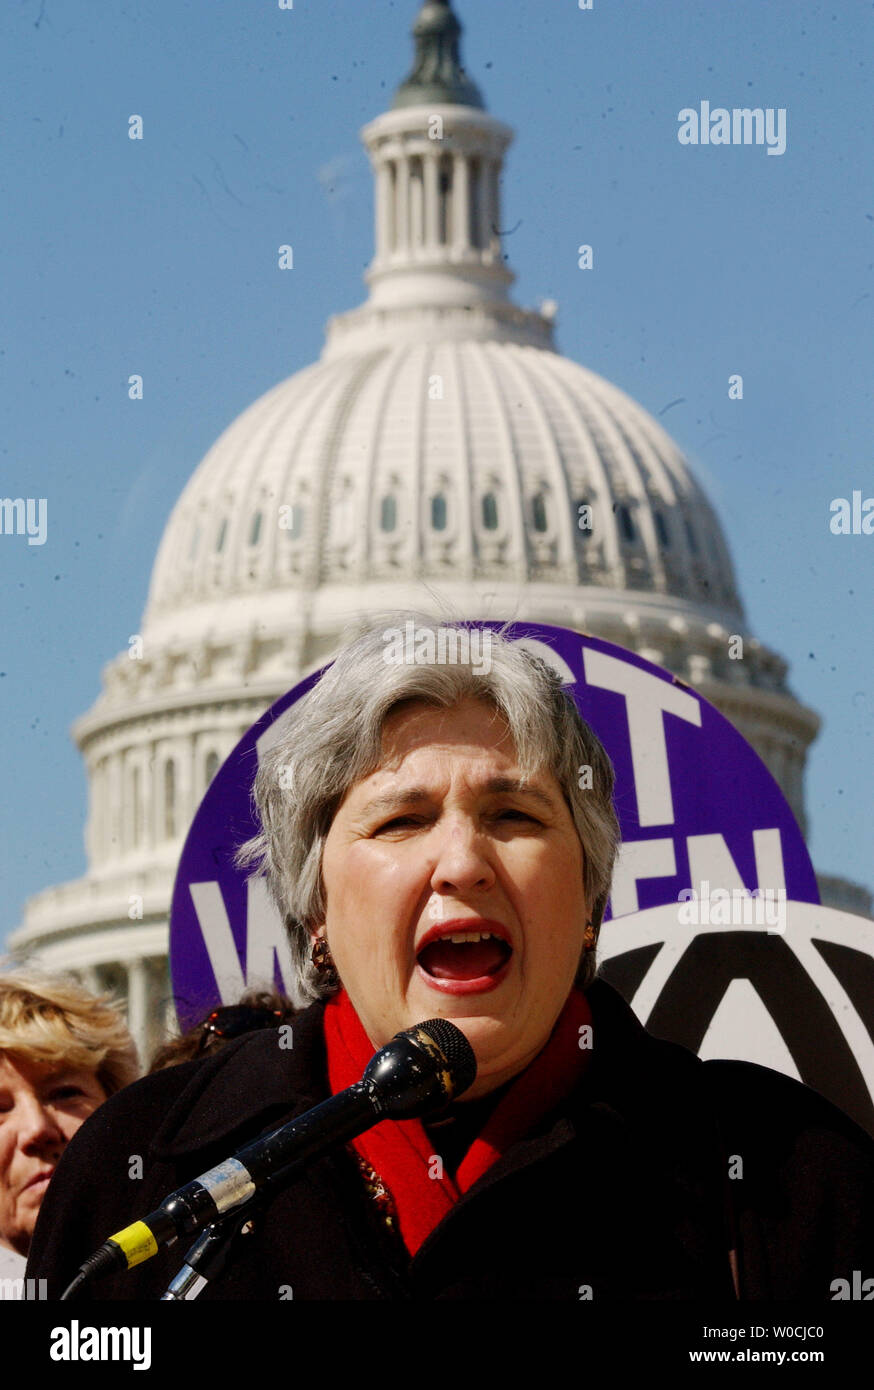 Elenanor Smeal of Feminist Majority speaks at a news conference to reintroduce the Equal Rights Amendment.to the Consitution on March 15, 2005 in Washington.  Smeal and others are calling for equal rights under the law for women. (UPI Photo/Michael Kleinfeld) Stock Photo